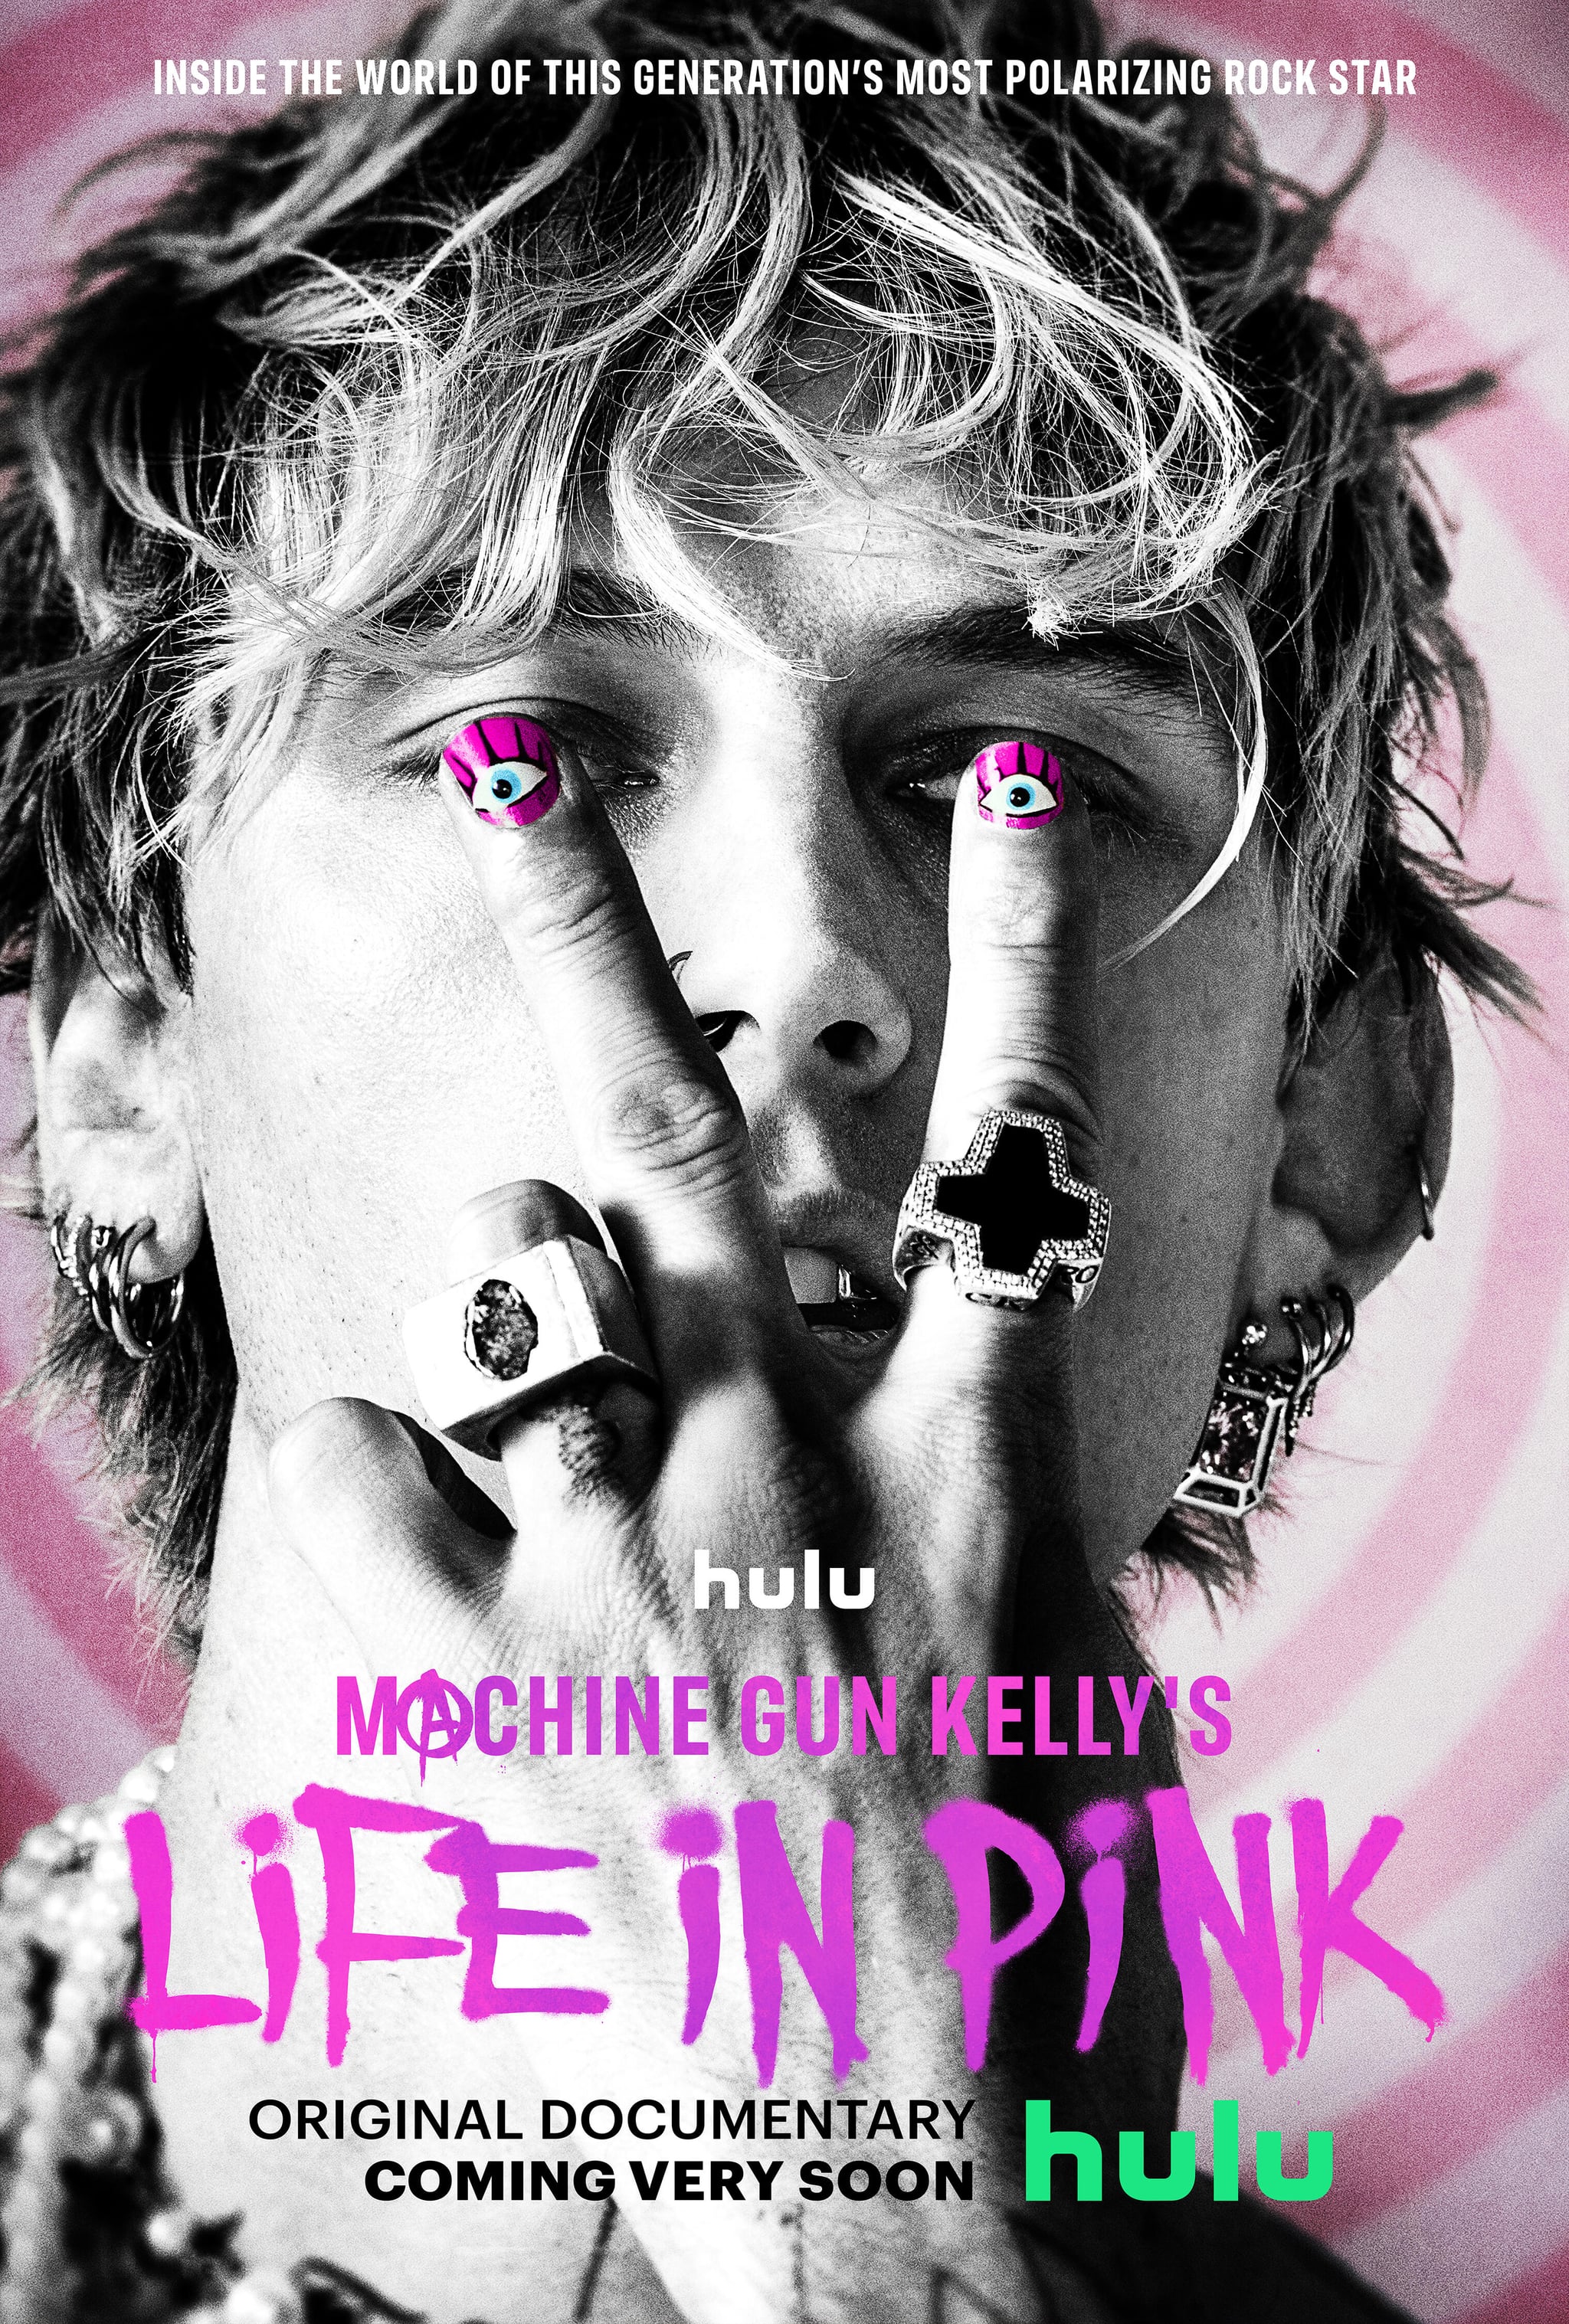 Machine Gun Kelly's Life in Pink -- Machine Gun Kelly's Life In Pink is an in-depth look at the dramatic highs and lows of an artist chasing music's top spot while tackling noise from the outside world, stardom, fatherhood and more. From creating his platinum-selling, Billboard No. 1 album 